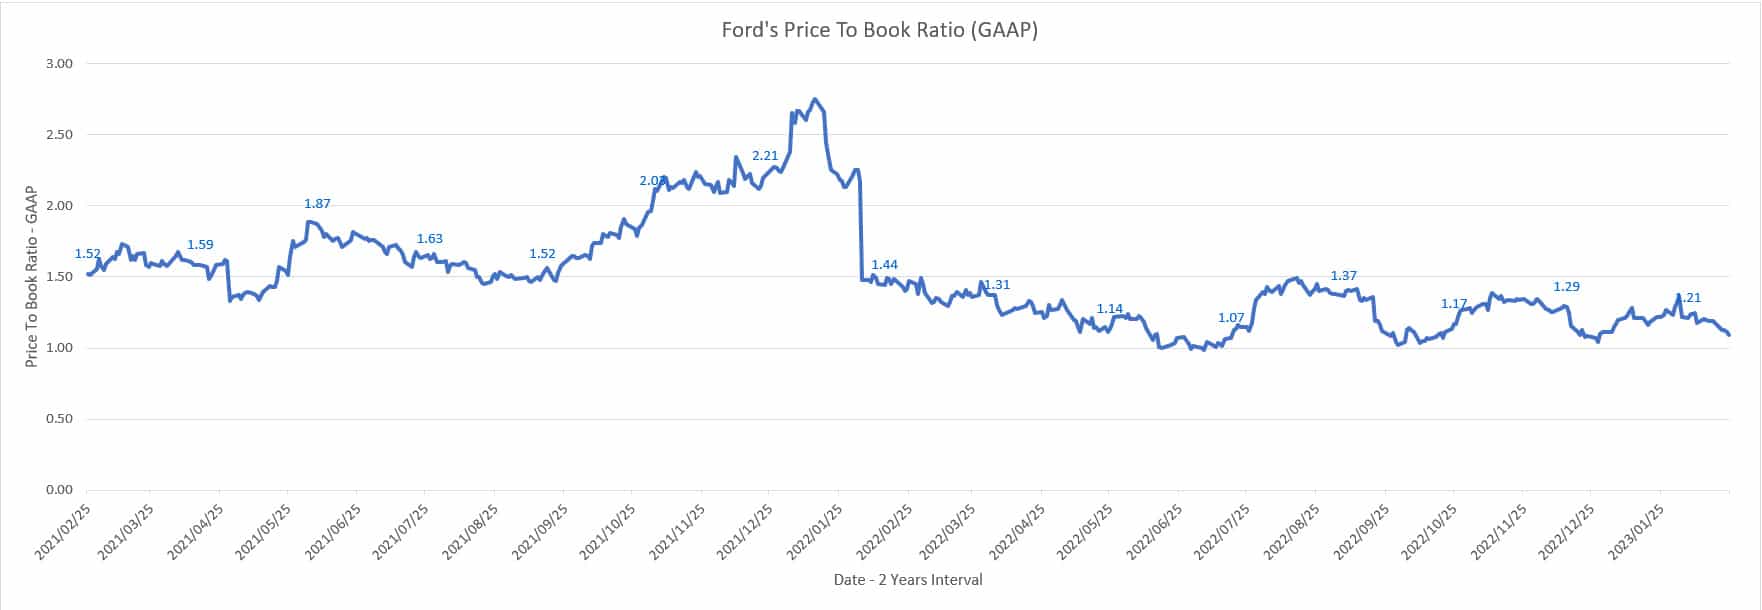 Ford's price to book ratio